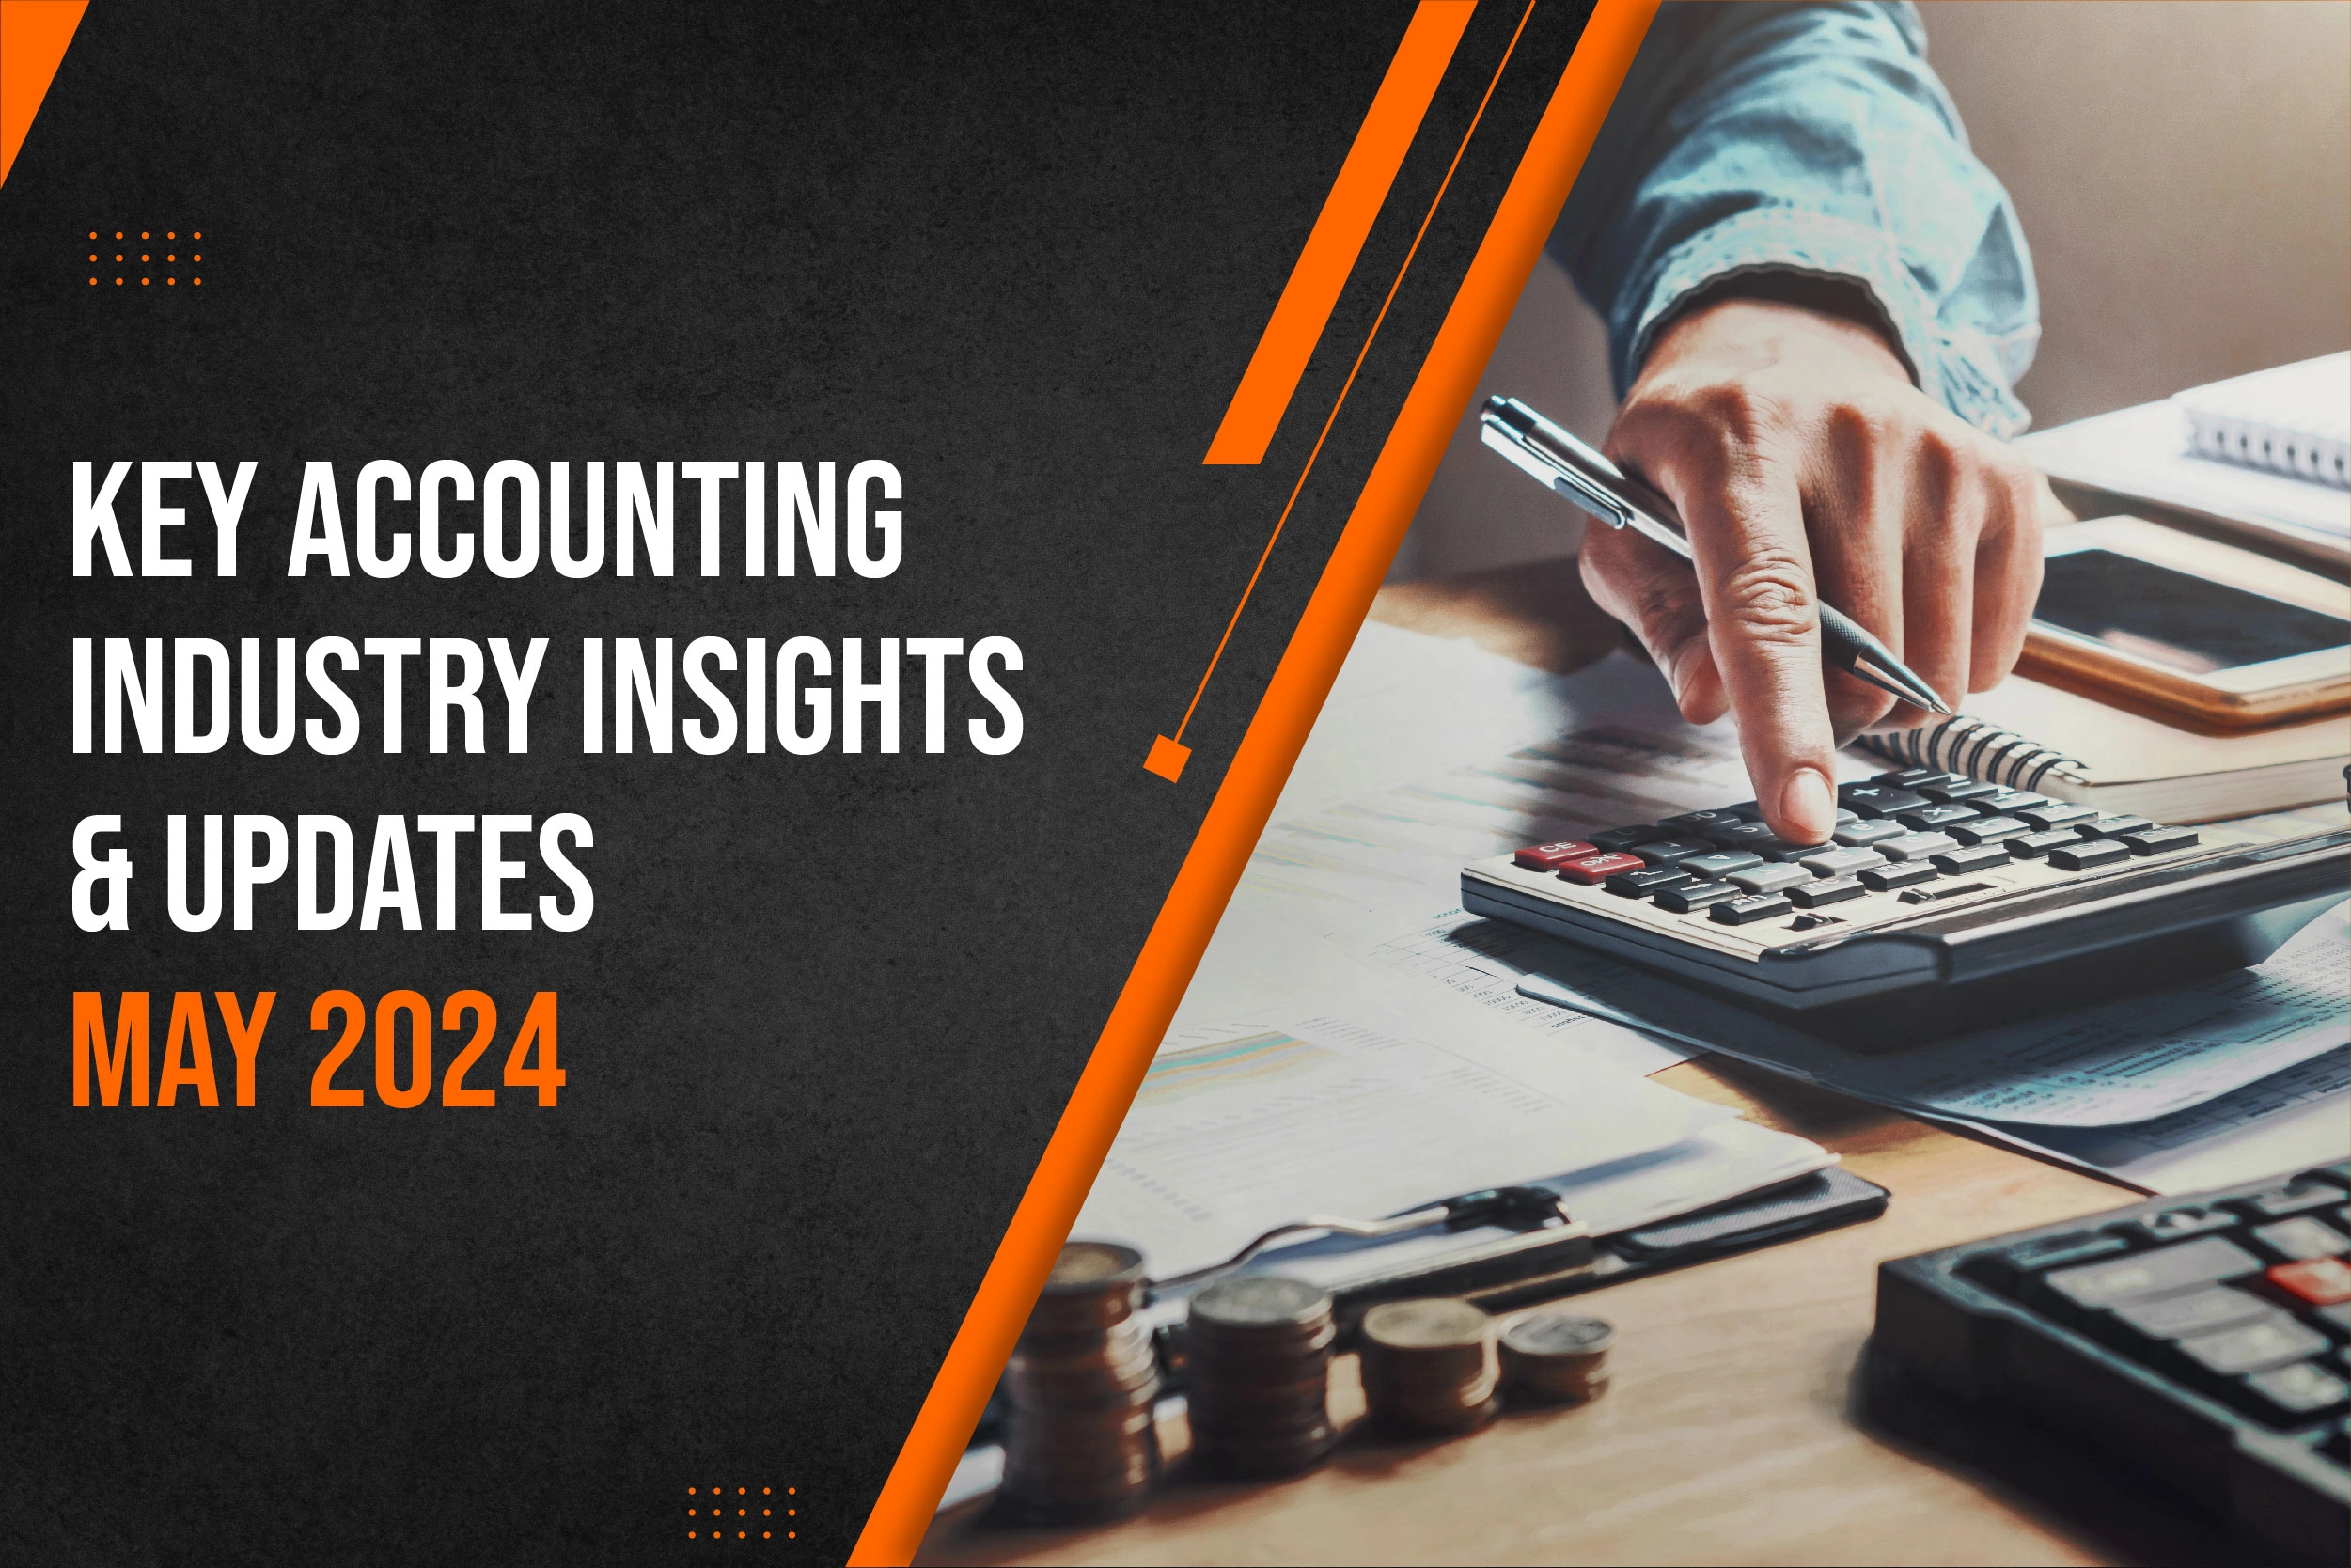 KEY ACCOUNTING INDUSTRY INSIGHTS AND UPDATES – MAY 2024